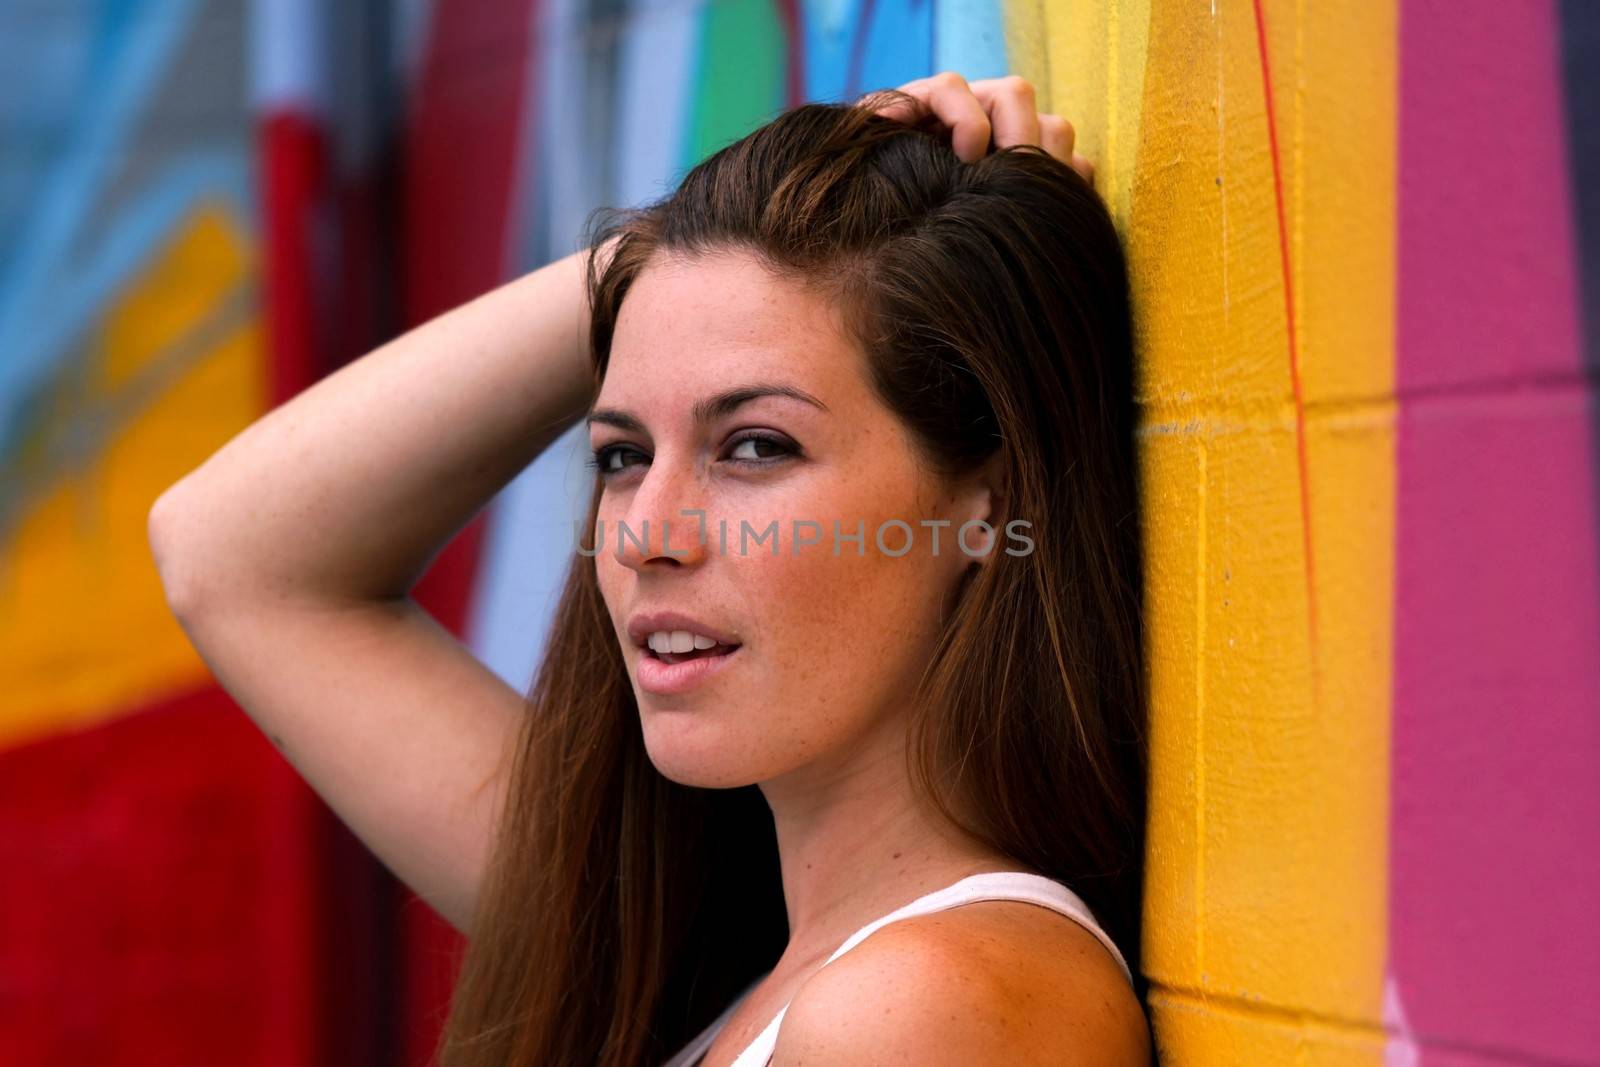 Portrait Of A WomanSide view portrait of a woman with colorful wall in the background.